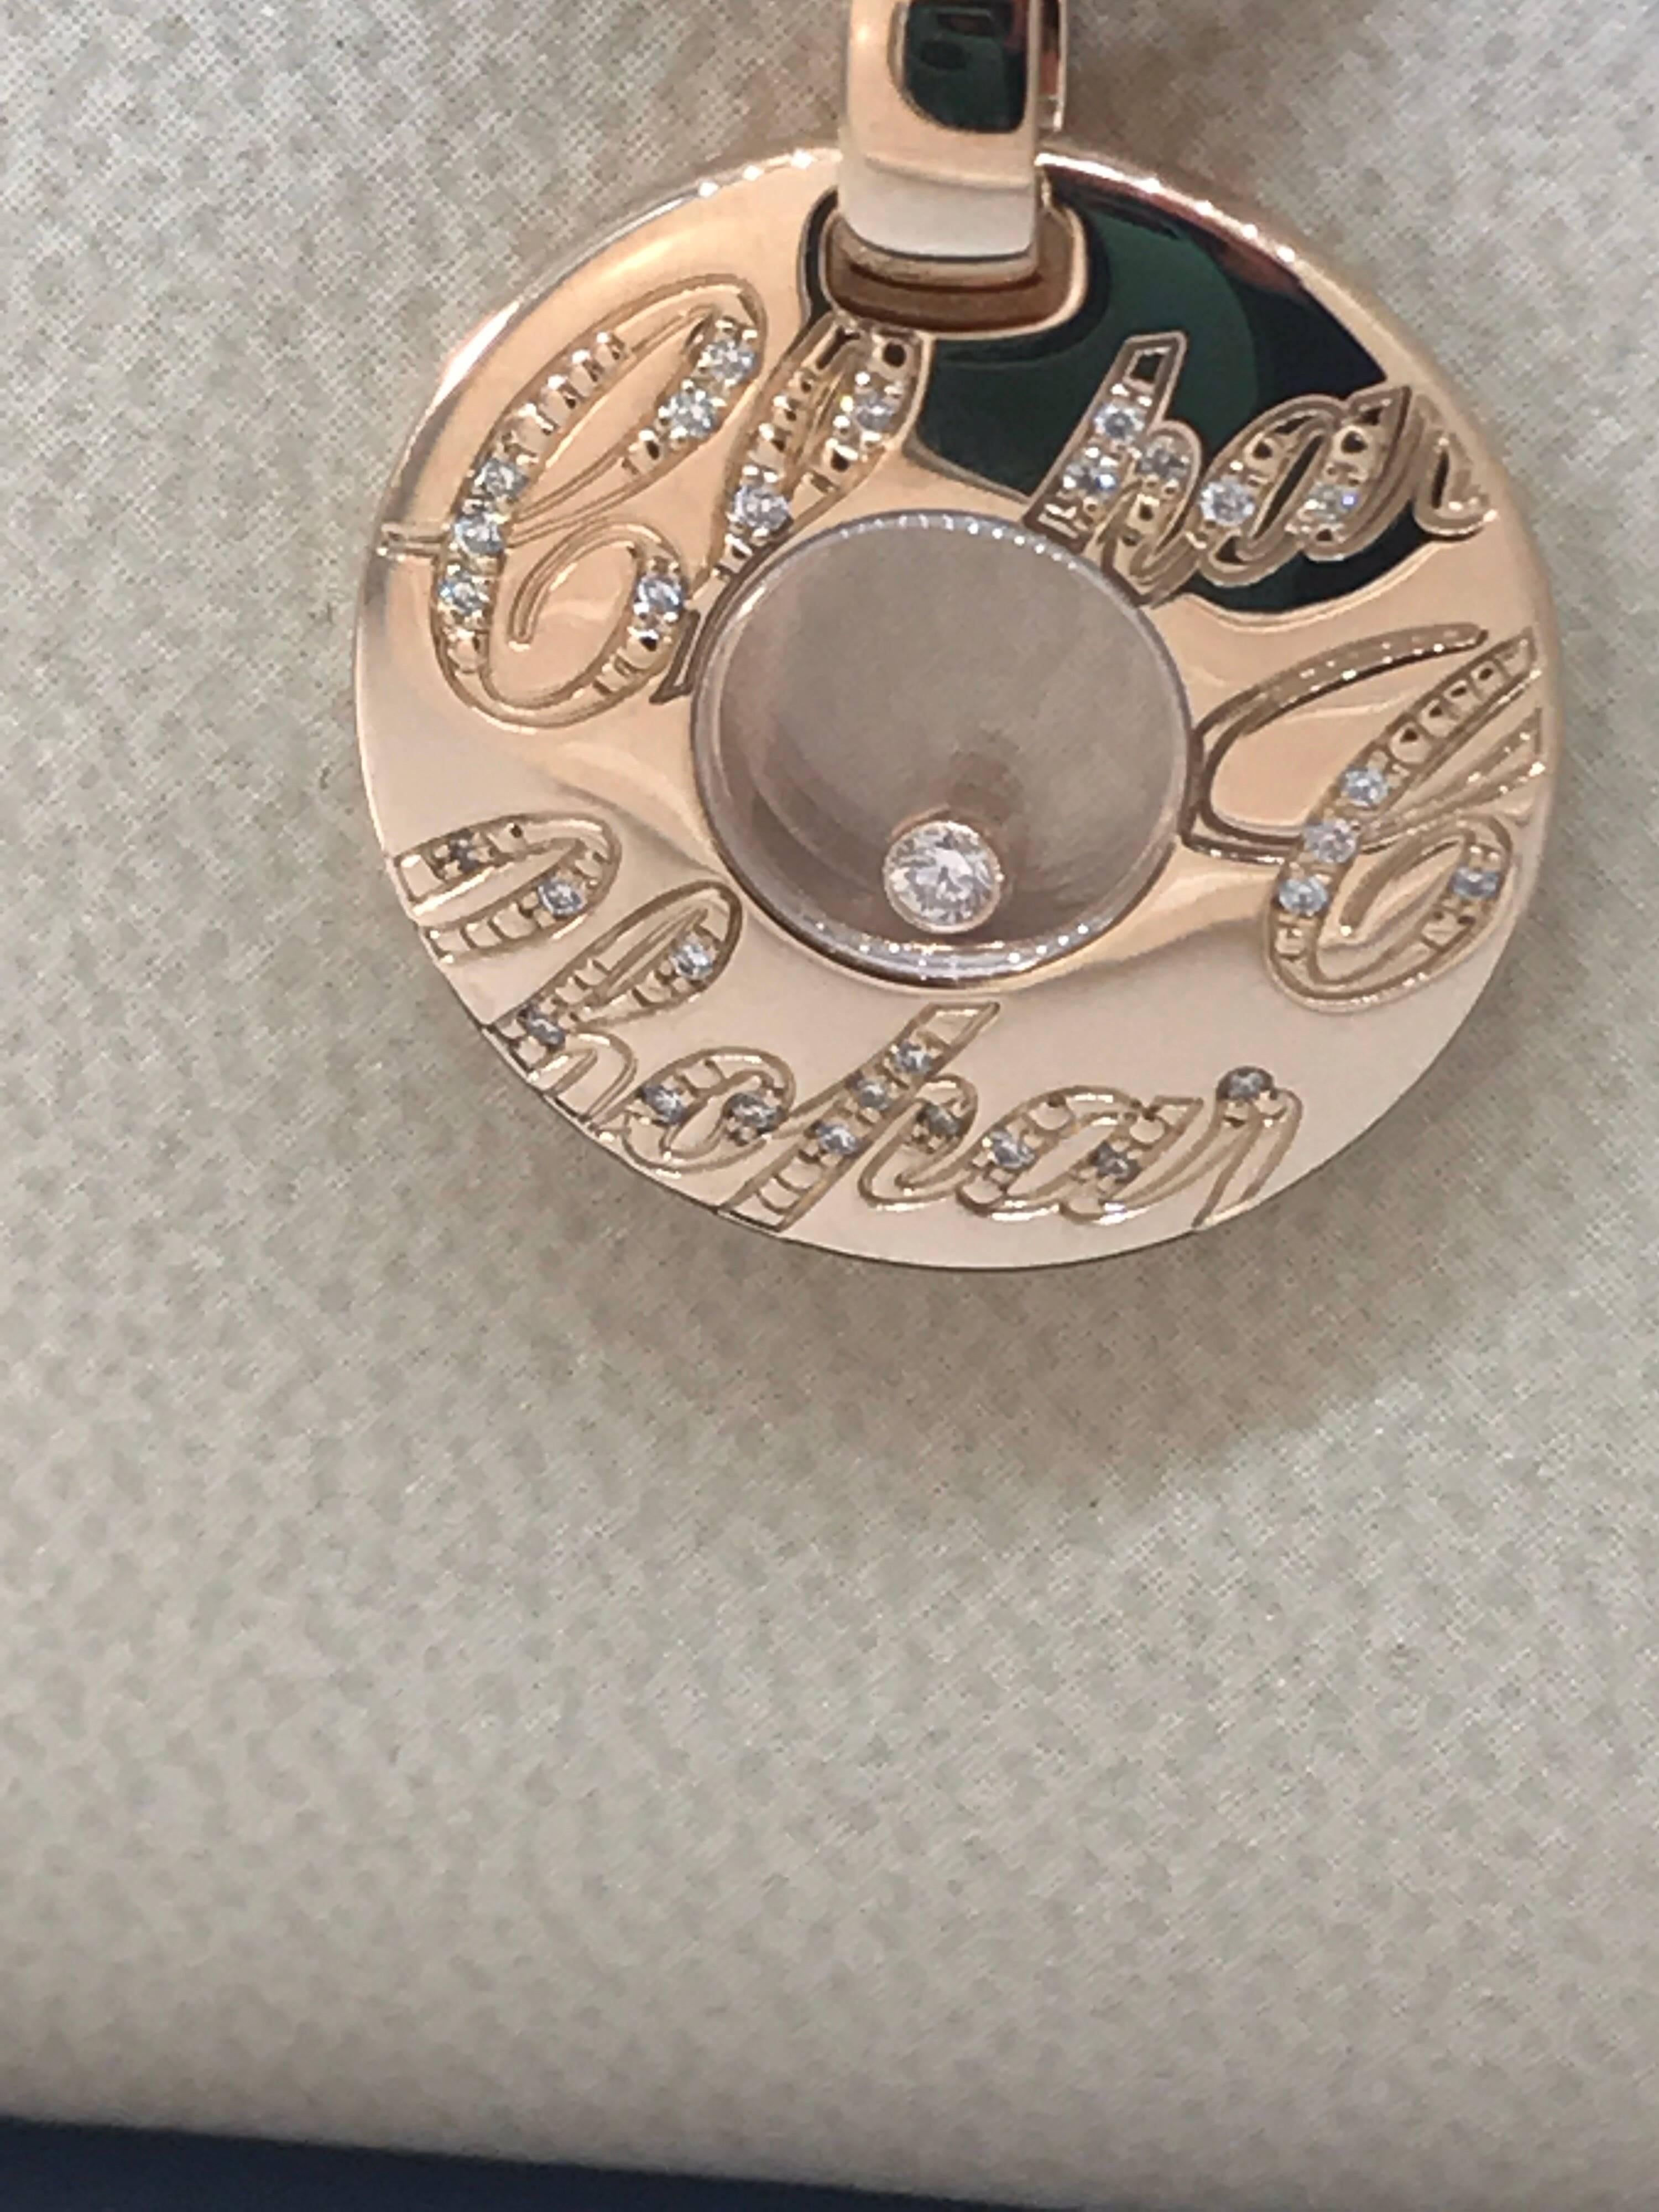 Chopard Chopardissimo 18 Karat Gold and Diamond Pendant 79/7601-5001 Brand New In New Condition For Sale In New York, NY